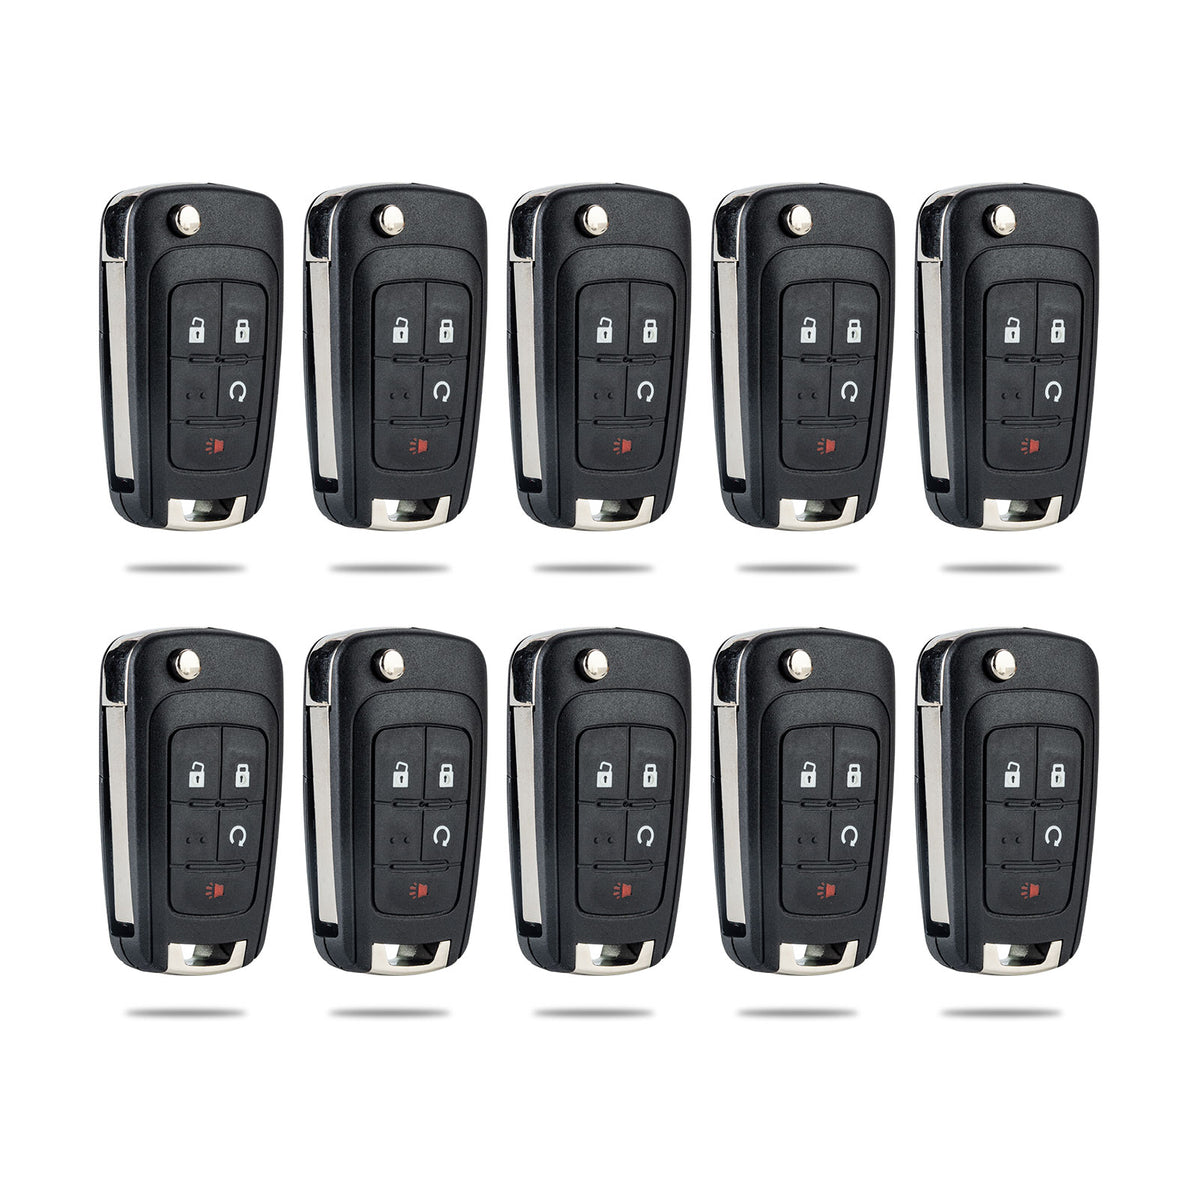 Lots of 10 Extra-Partss Remote Car Key Fob Replacement for Chevy OHT01060512 4-btn fits 2012 2013 2014 2015 2016 2017 Sonic